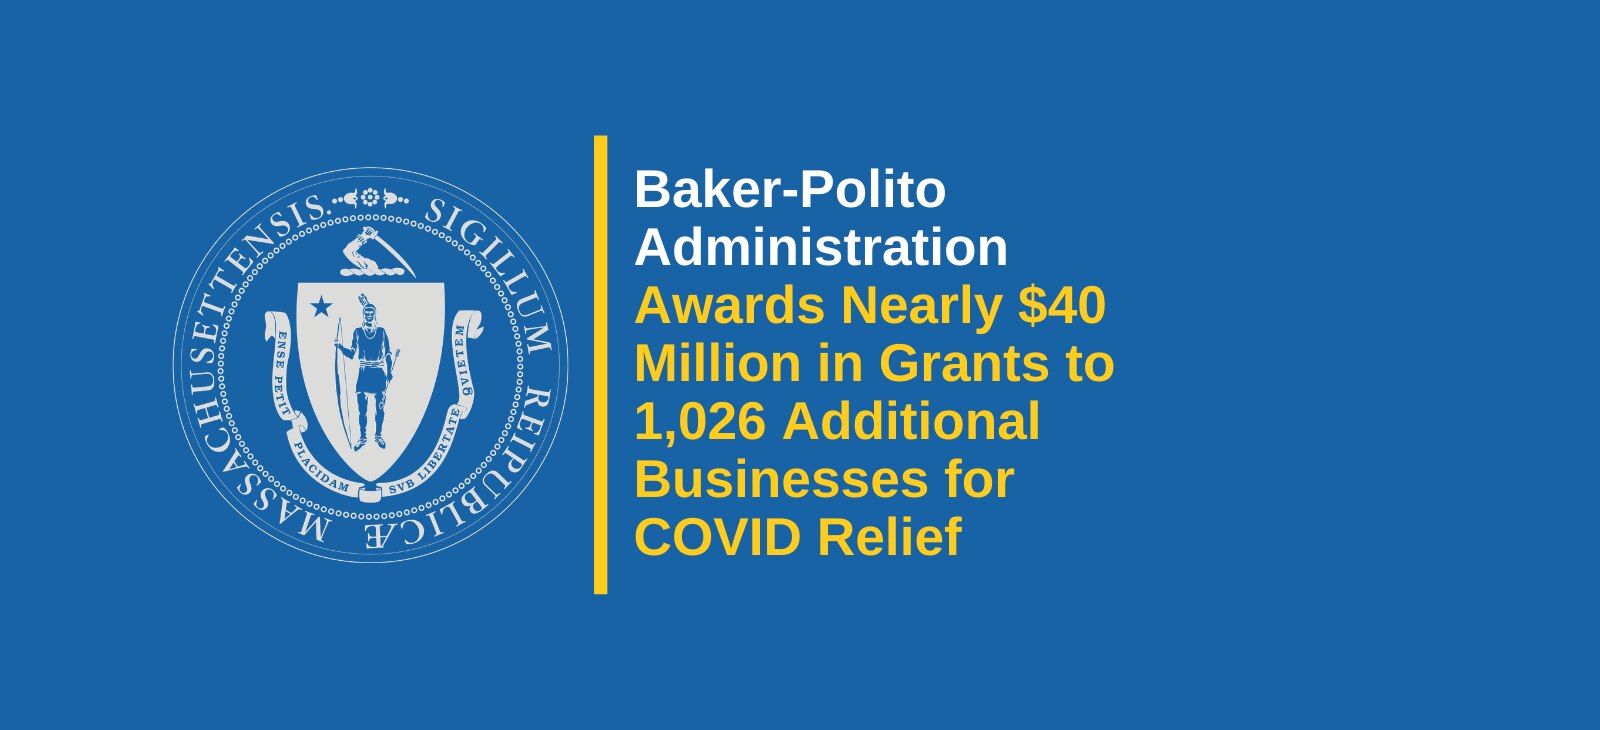 Baker-Polito Administration Awards Nearly $40 Million in Grants to 1,026 Additional Businesses for COVID Relief